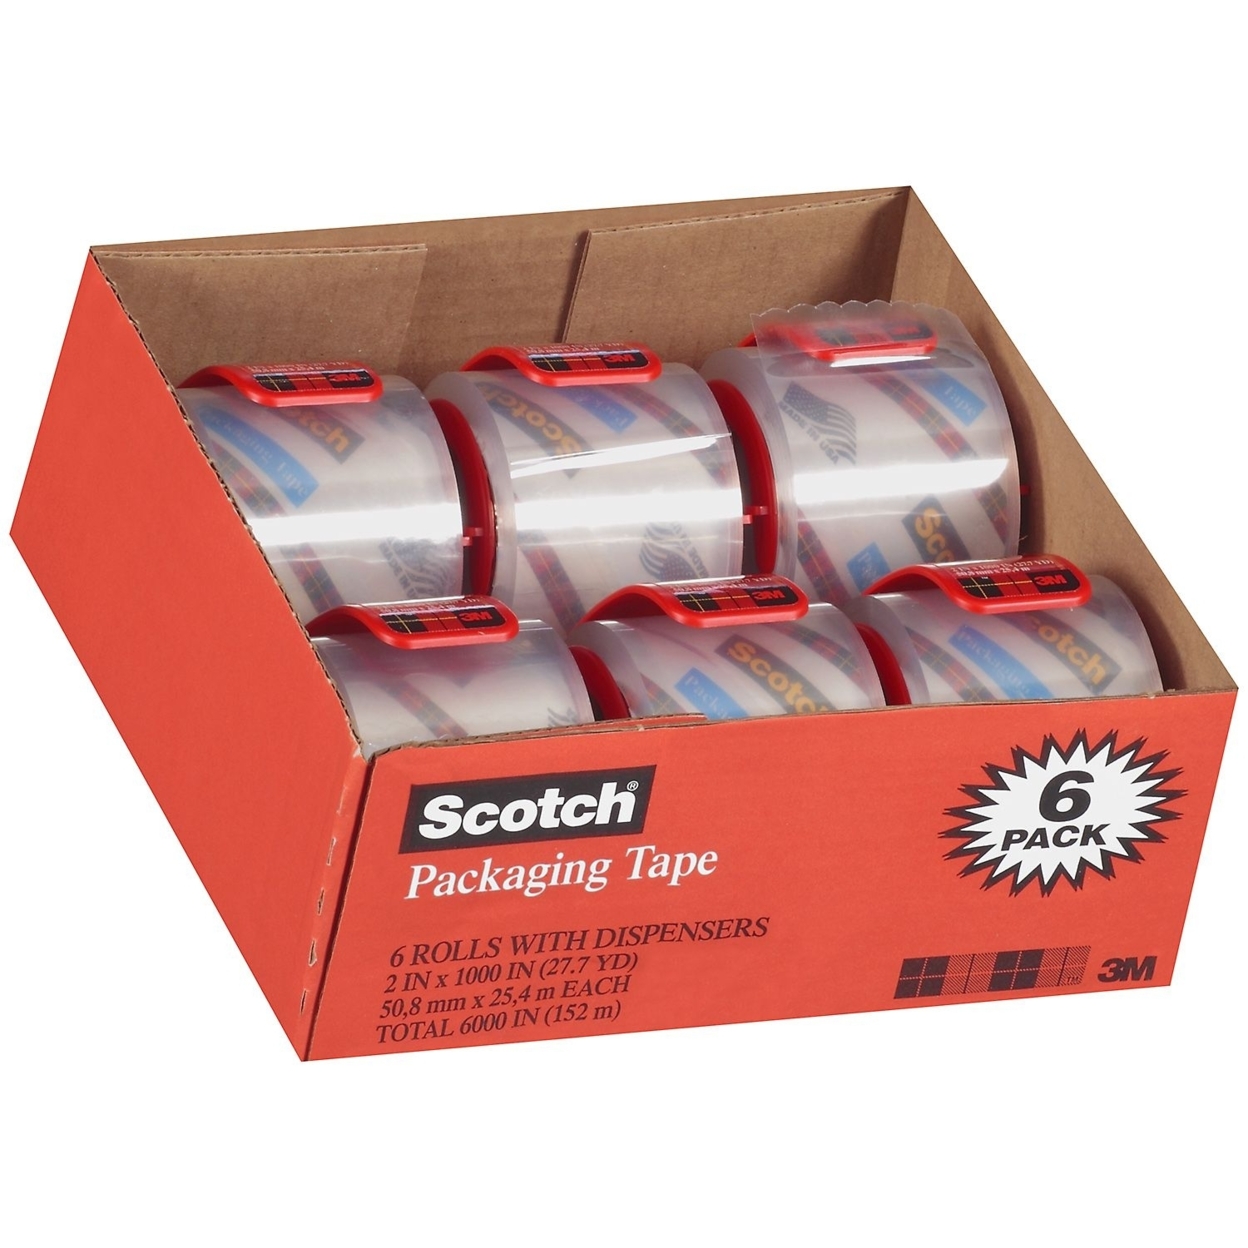 Scotch - 3850 Shipping Packaging Tape, 2 X 27.7YD - 6 Rolls W/Dispensers